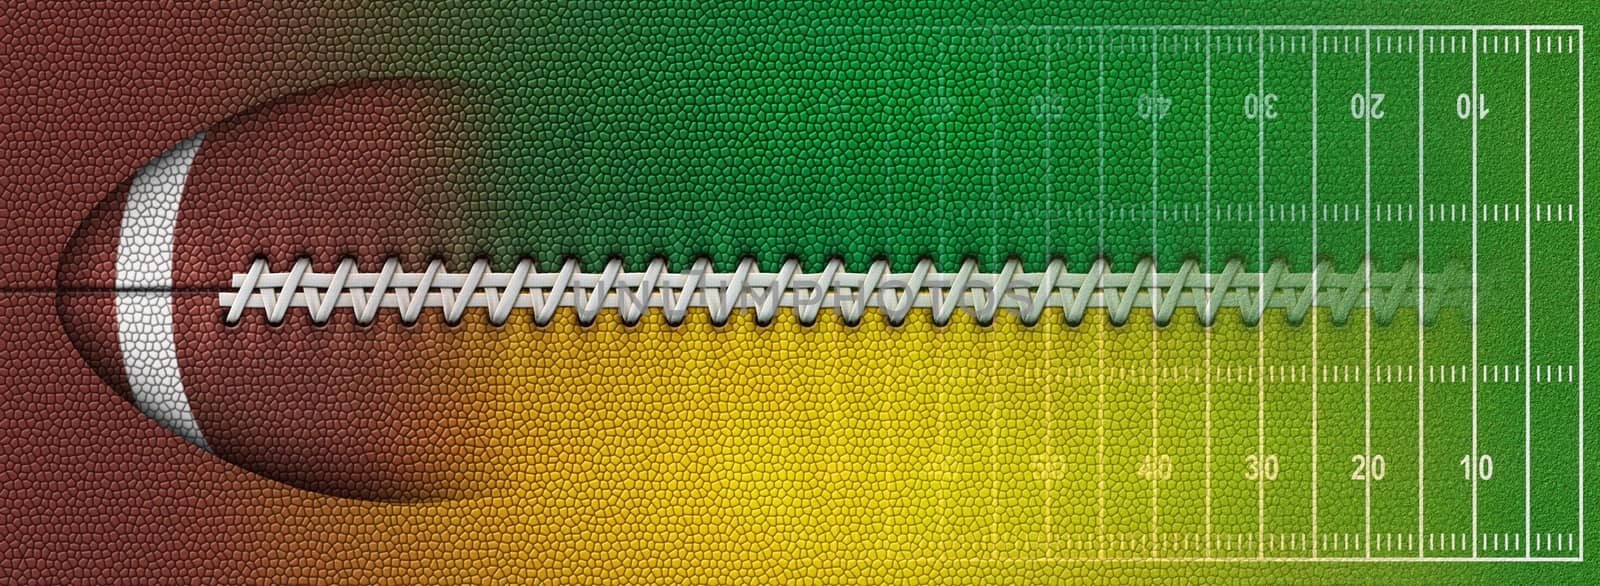 Digital Illustration of a footballÕs texture, laces, and a football field to use as a background for text or other graphics.  